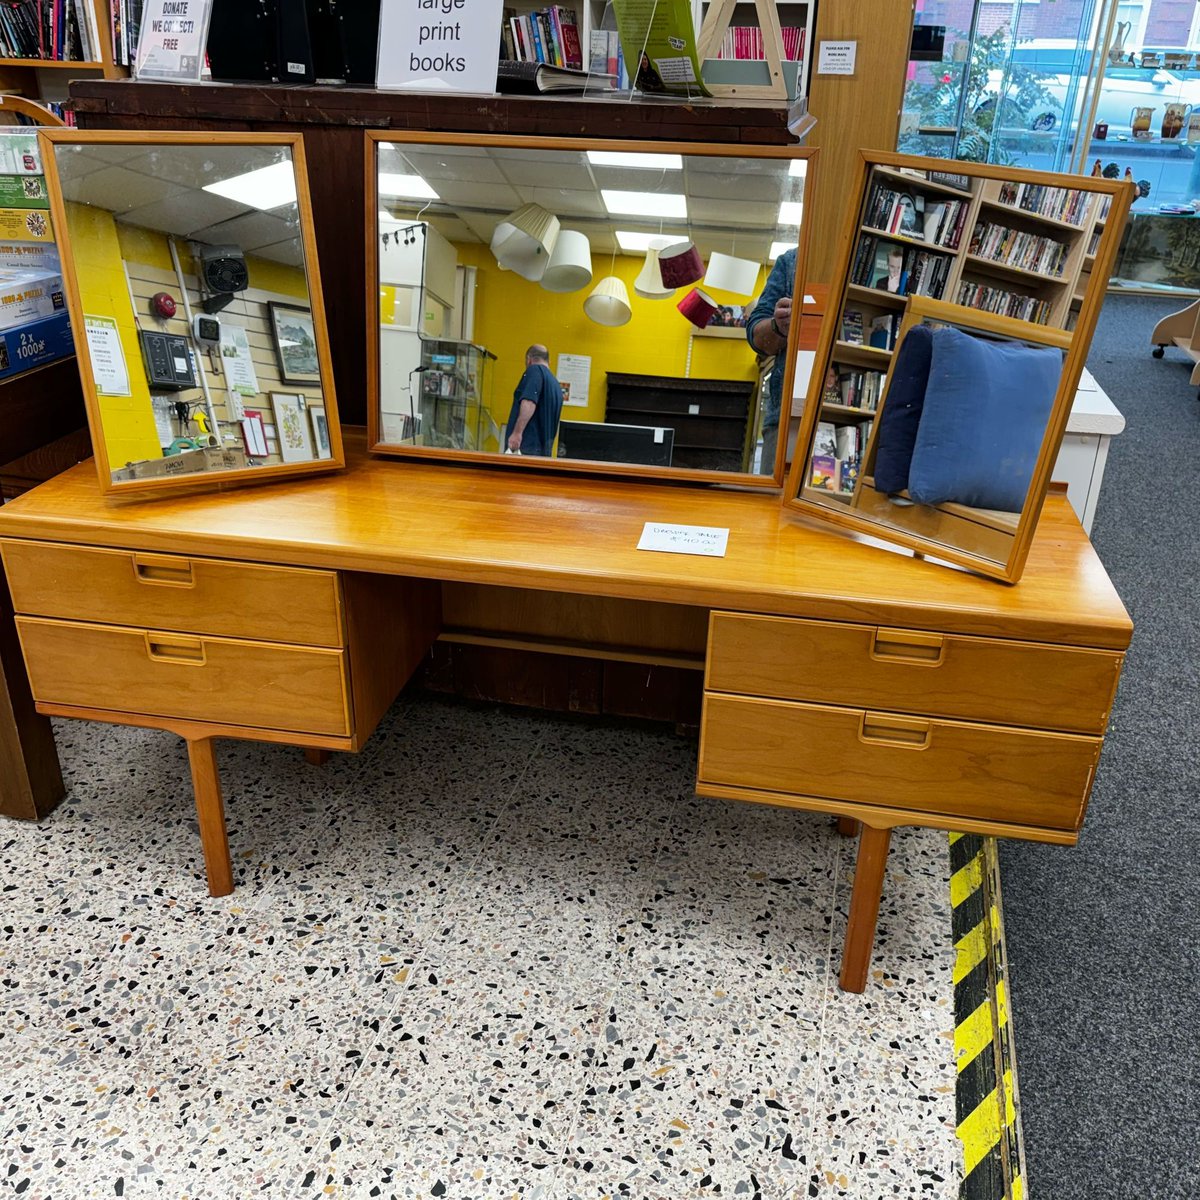 Dressing Table £40
We are in need of good condition donations to continue our work. We operate a local collection service for large furniture, call the shop 02380 779580. #secondhandfurniture #southampton #retrofurniture #charityshops #foundinoxfam #shirley #oxfamshops #furniture